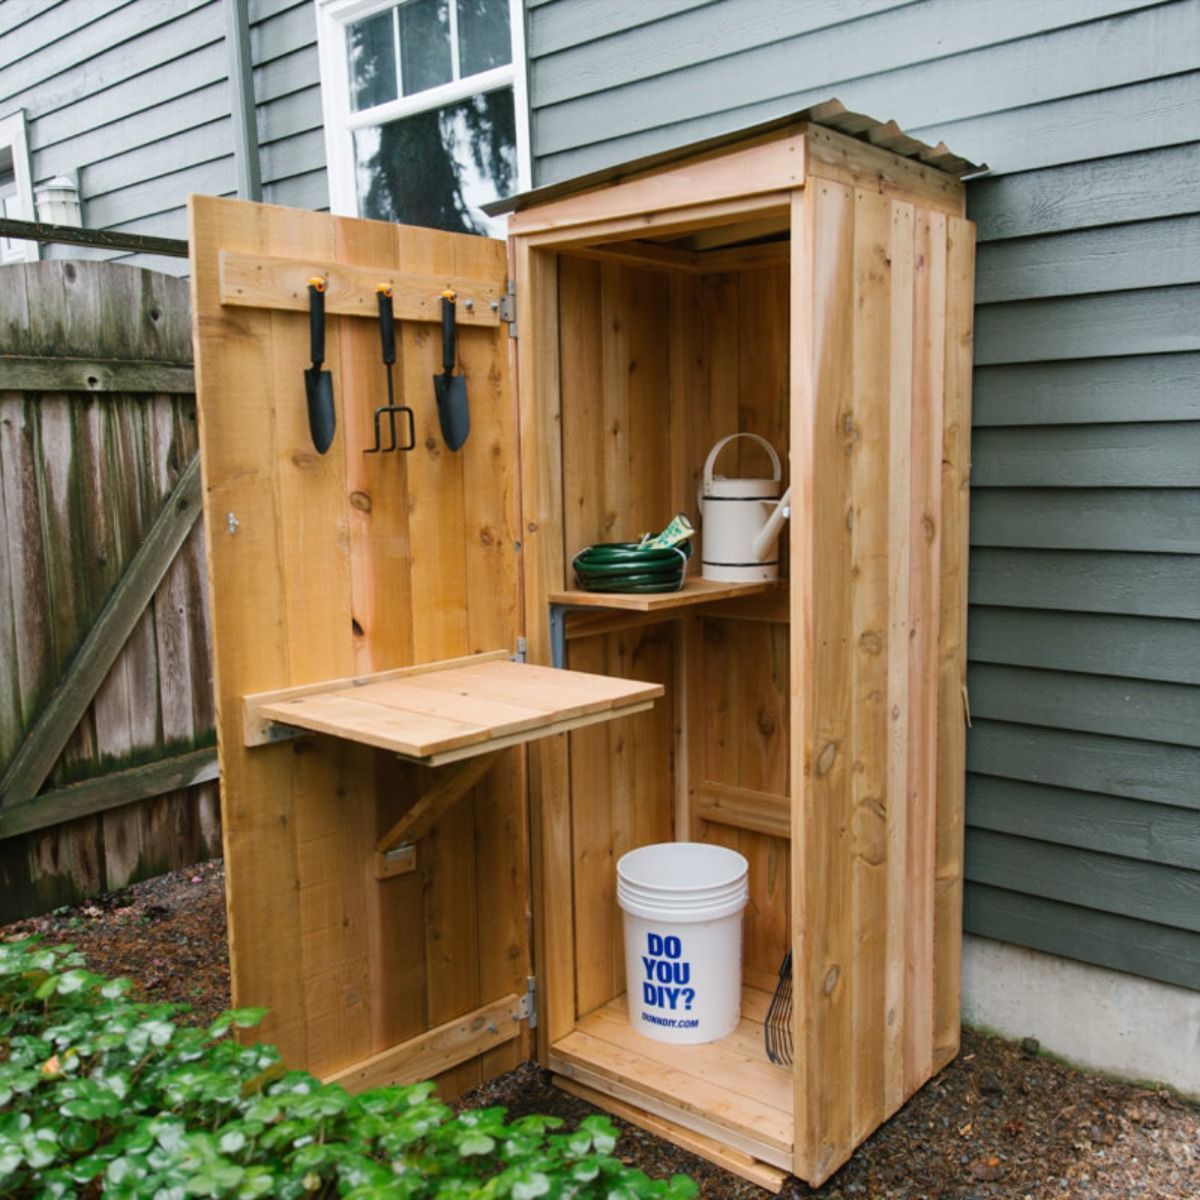 How to Build a DIY Garden Storage Shed - How to Build a DIY Garden Storage Shed -   19 diy Outdoor storage ideas